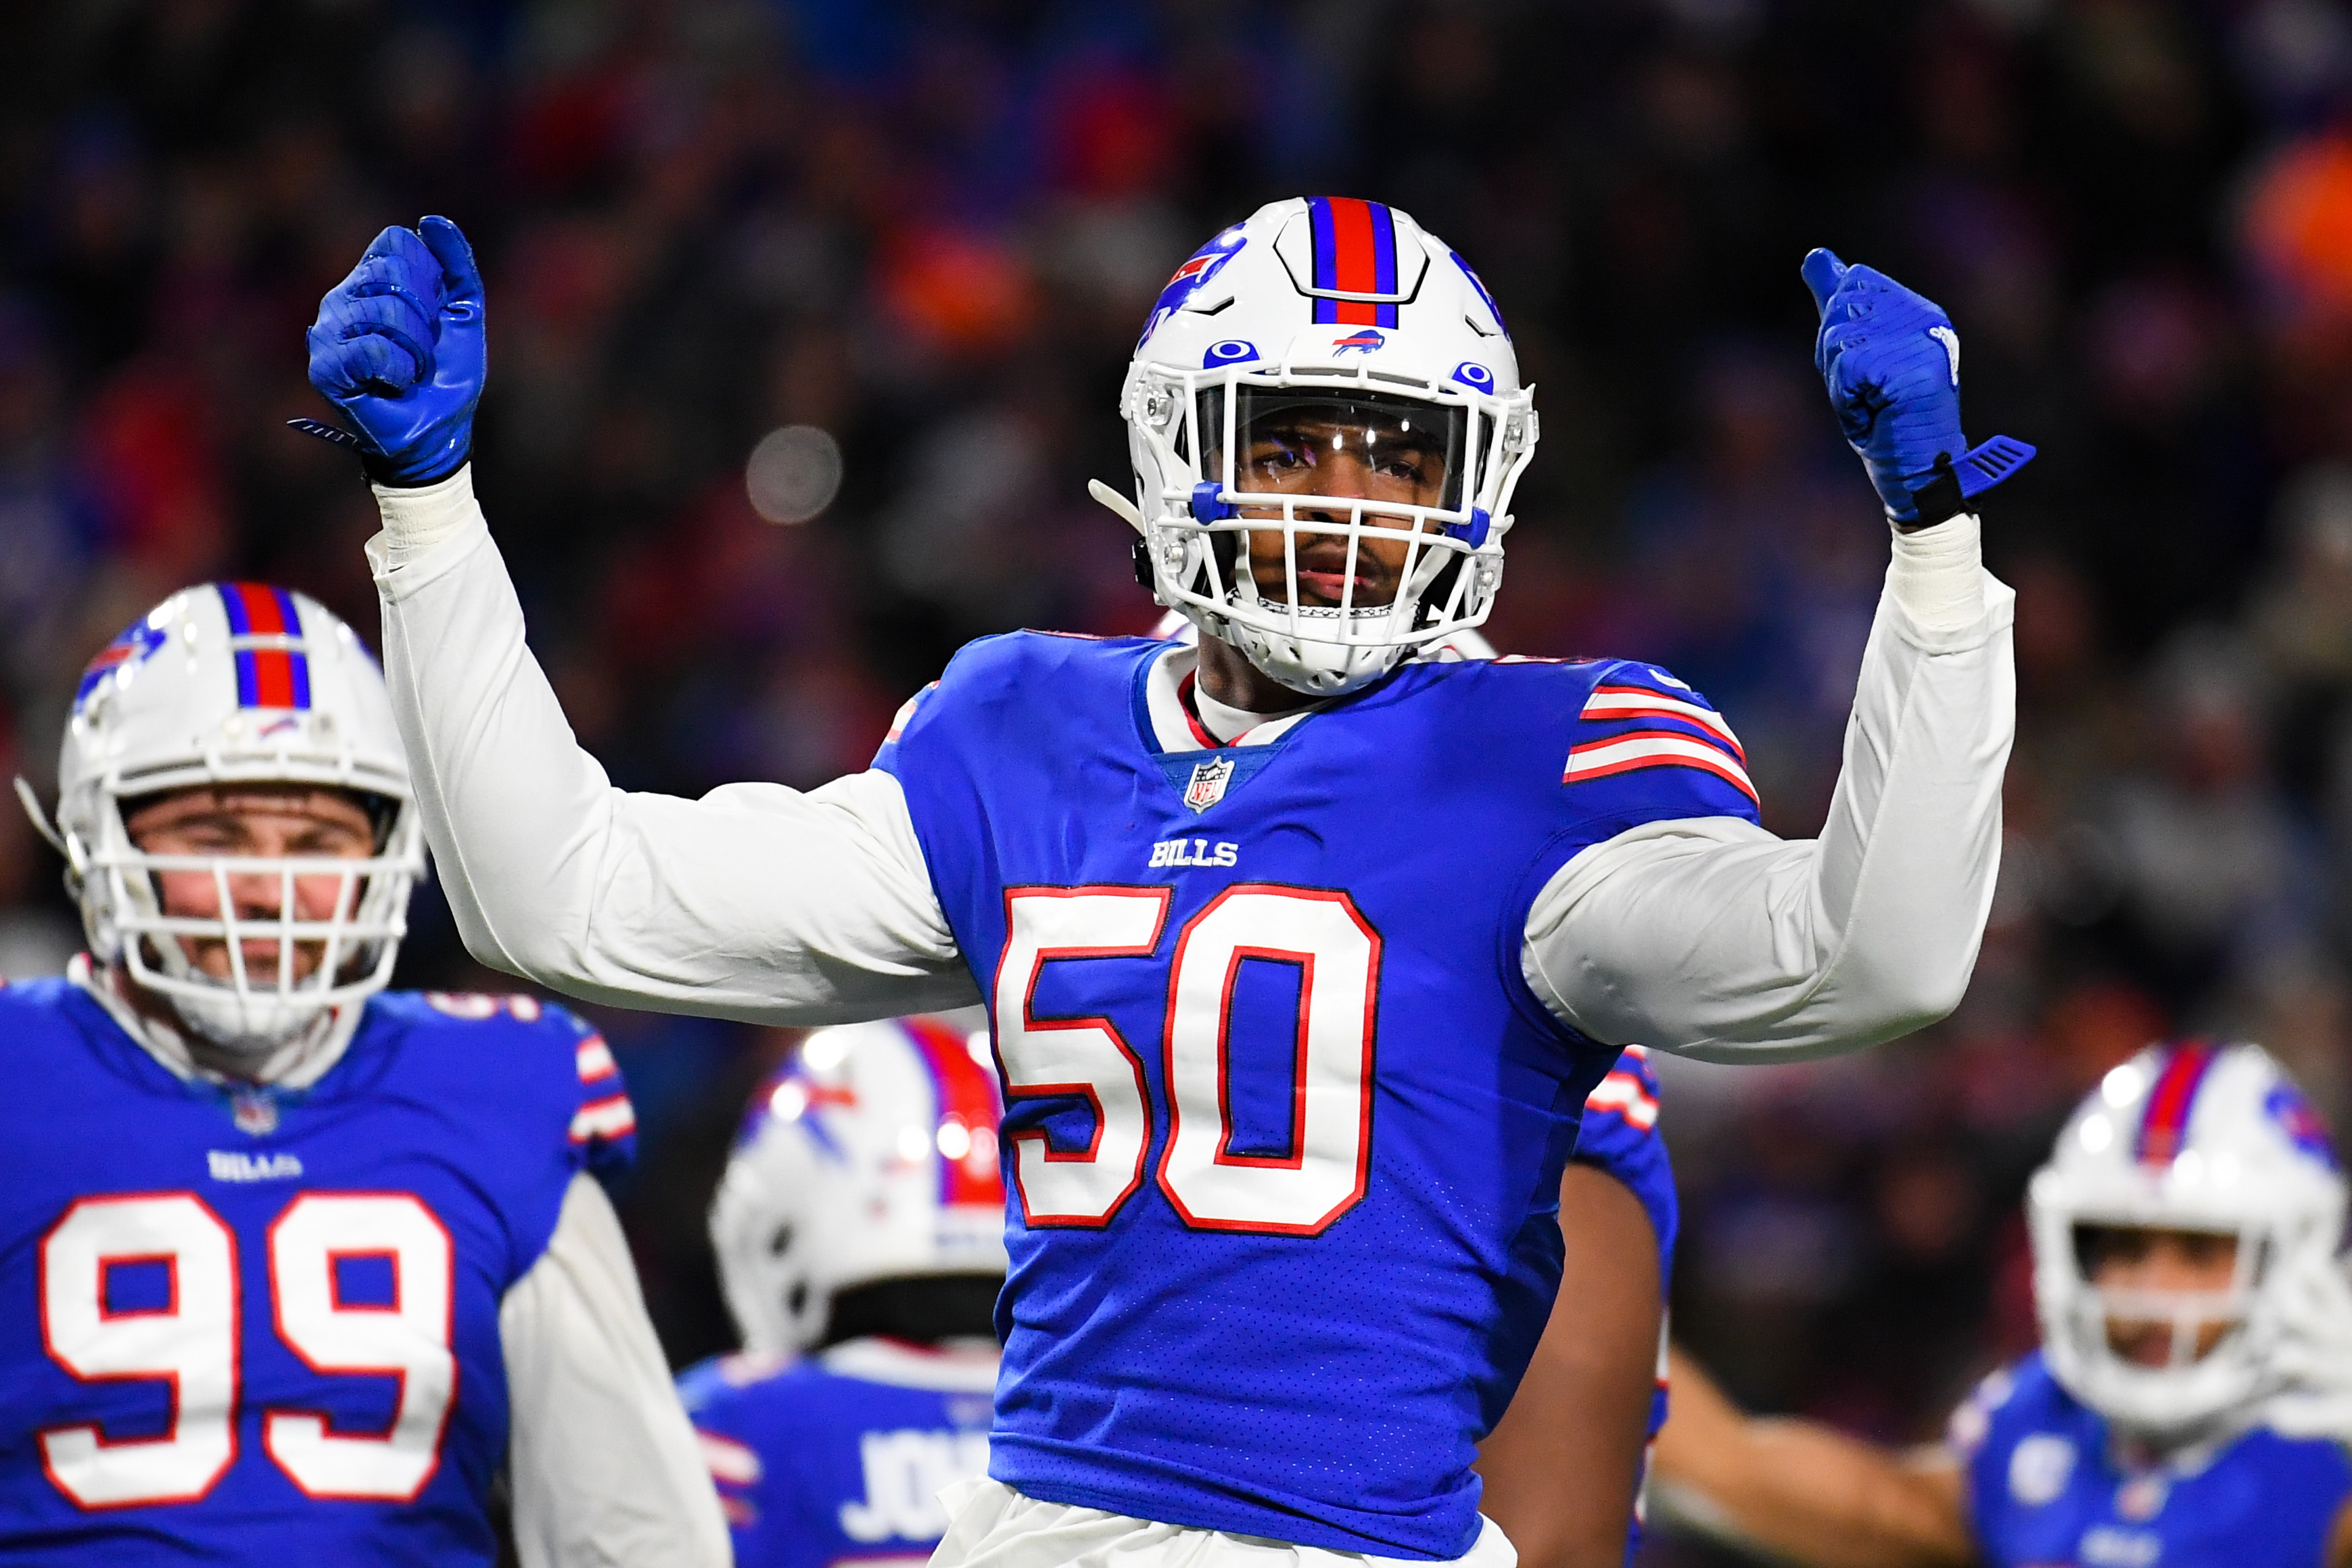 Bills pass rusher Greg Rousseau aiming for 'next level': I want